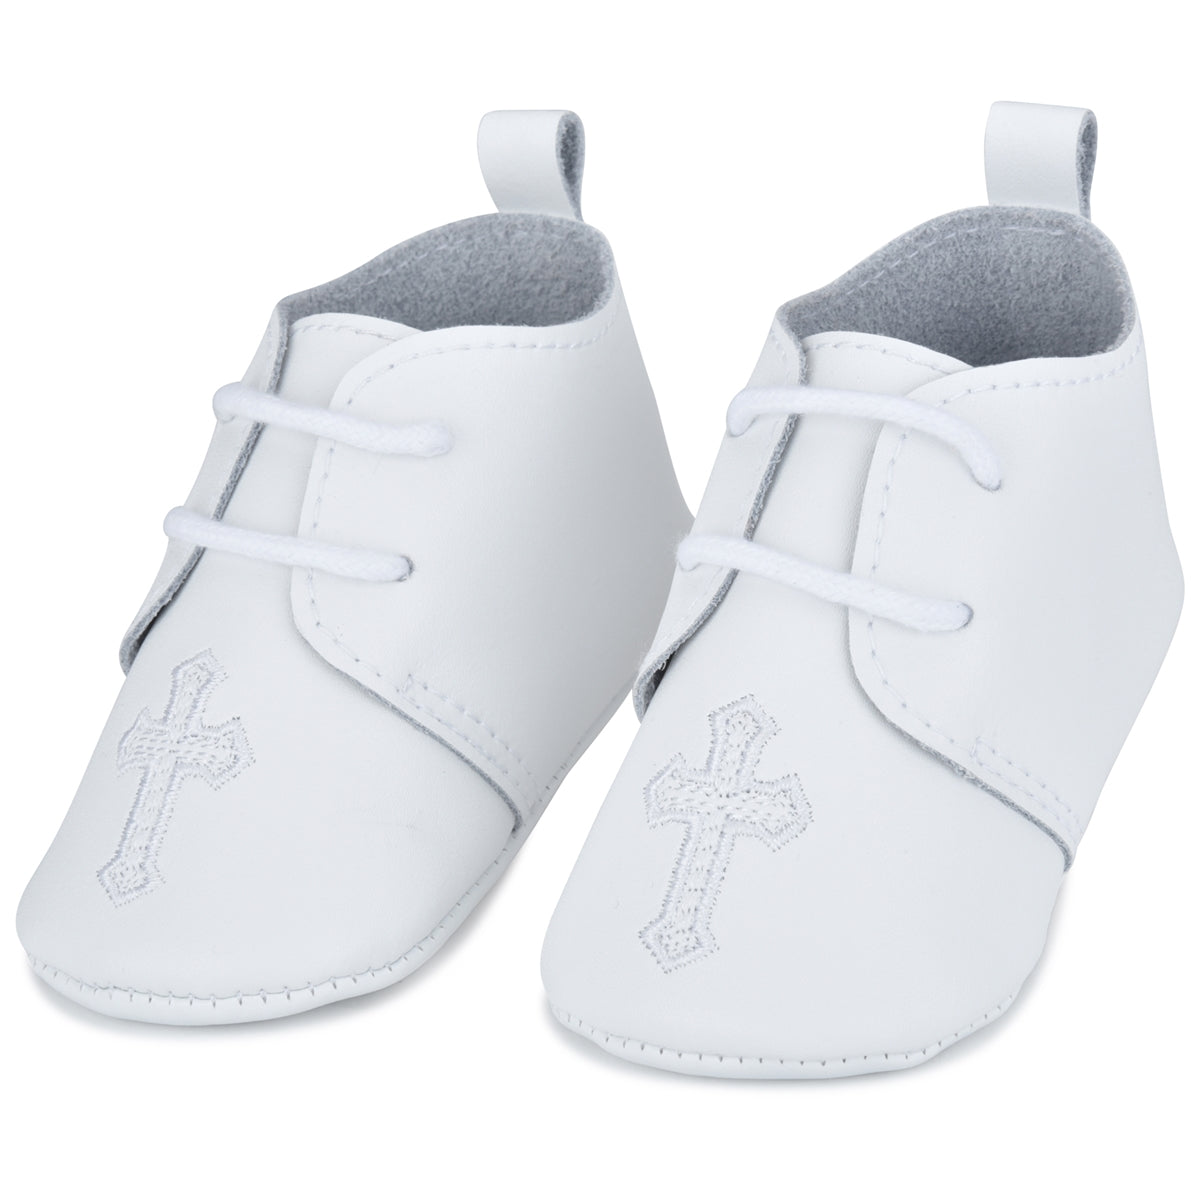 baby shoes baptism